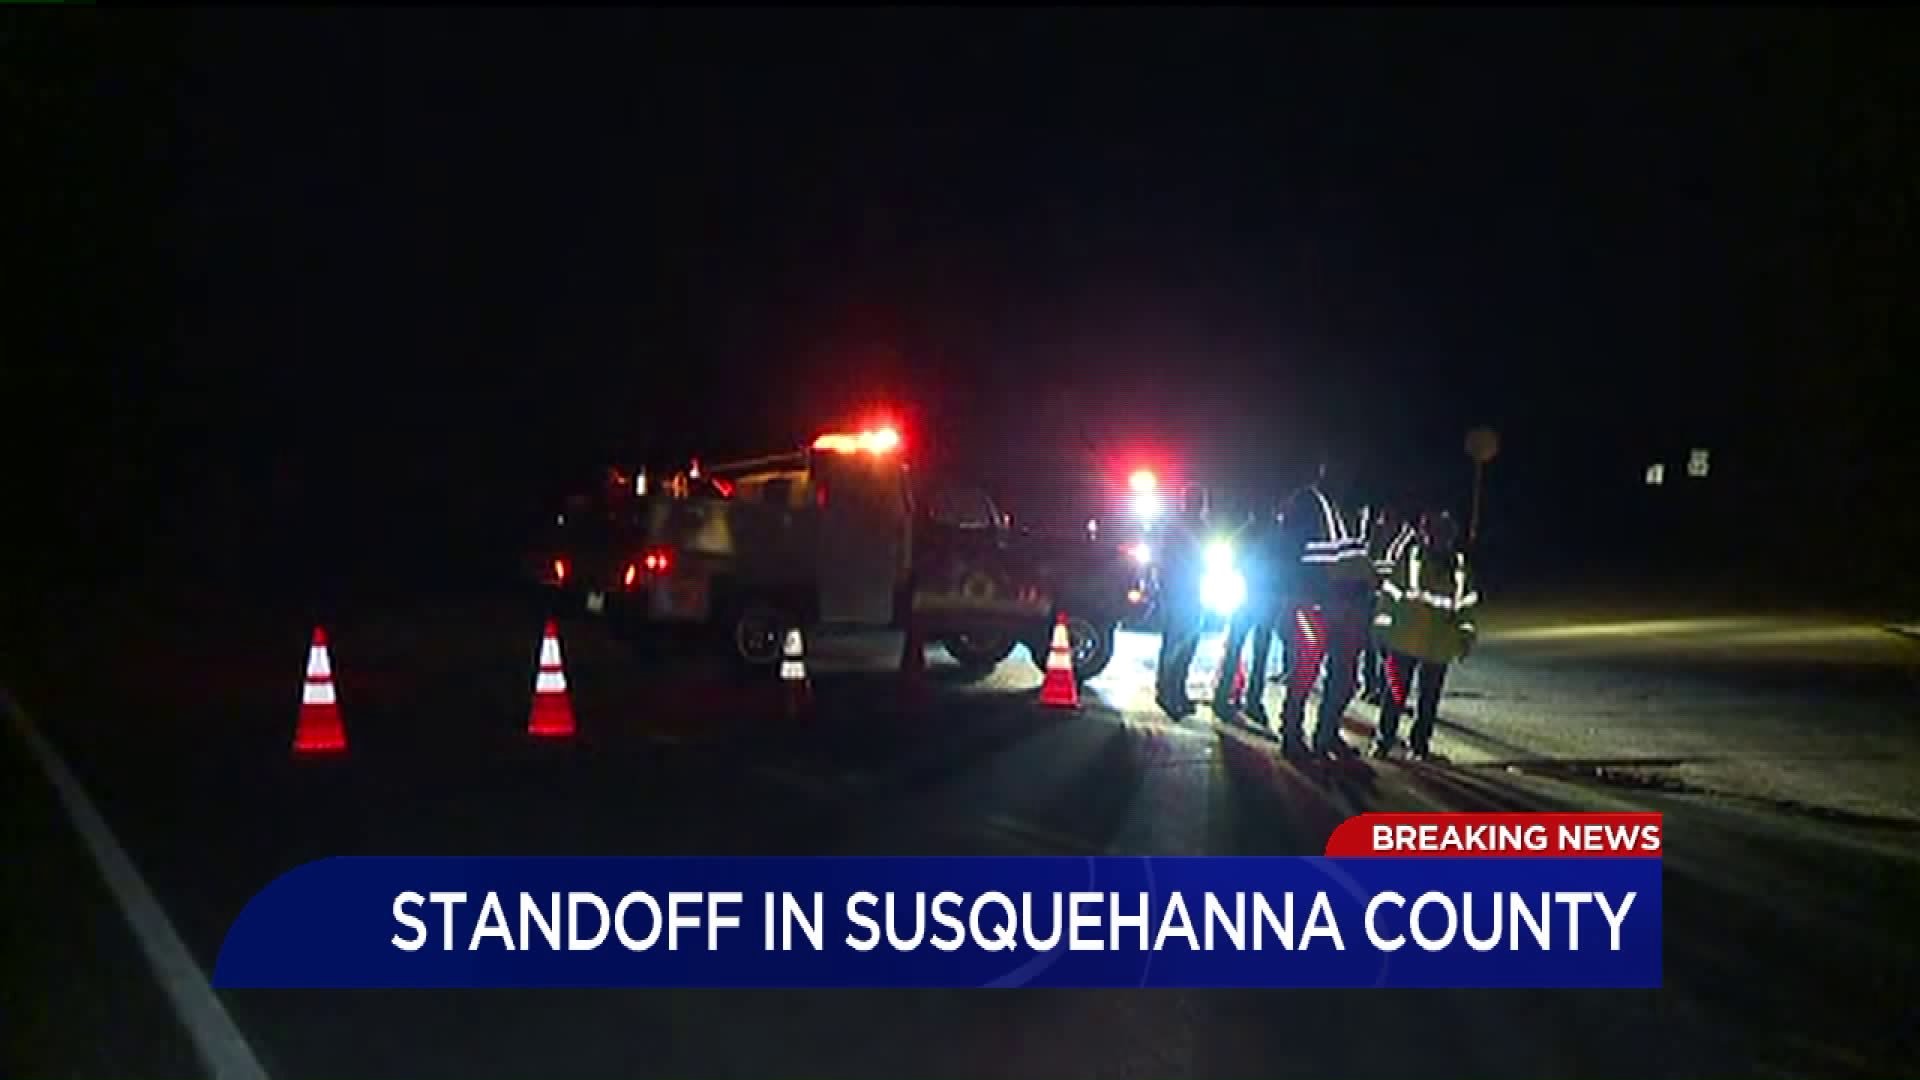 Man in Susquehanna County in Standoff With Police